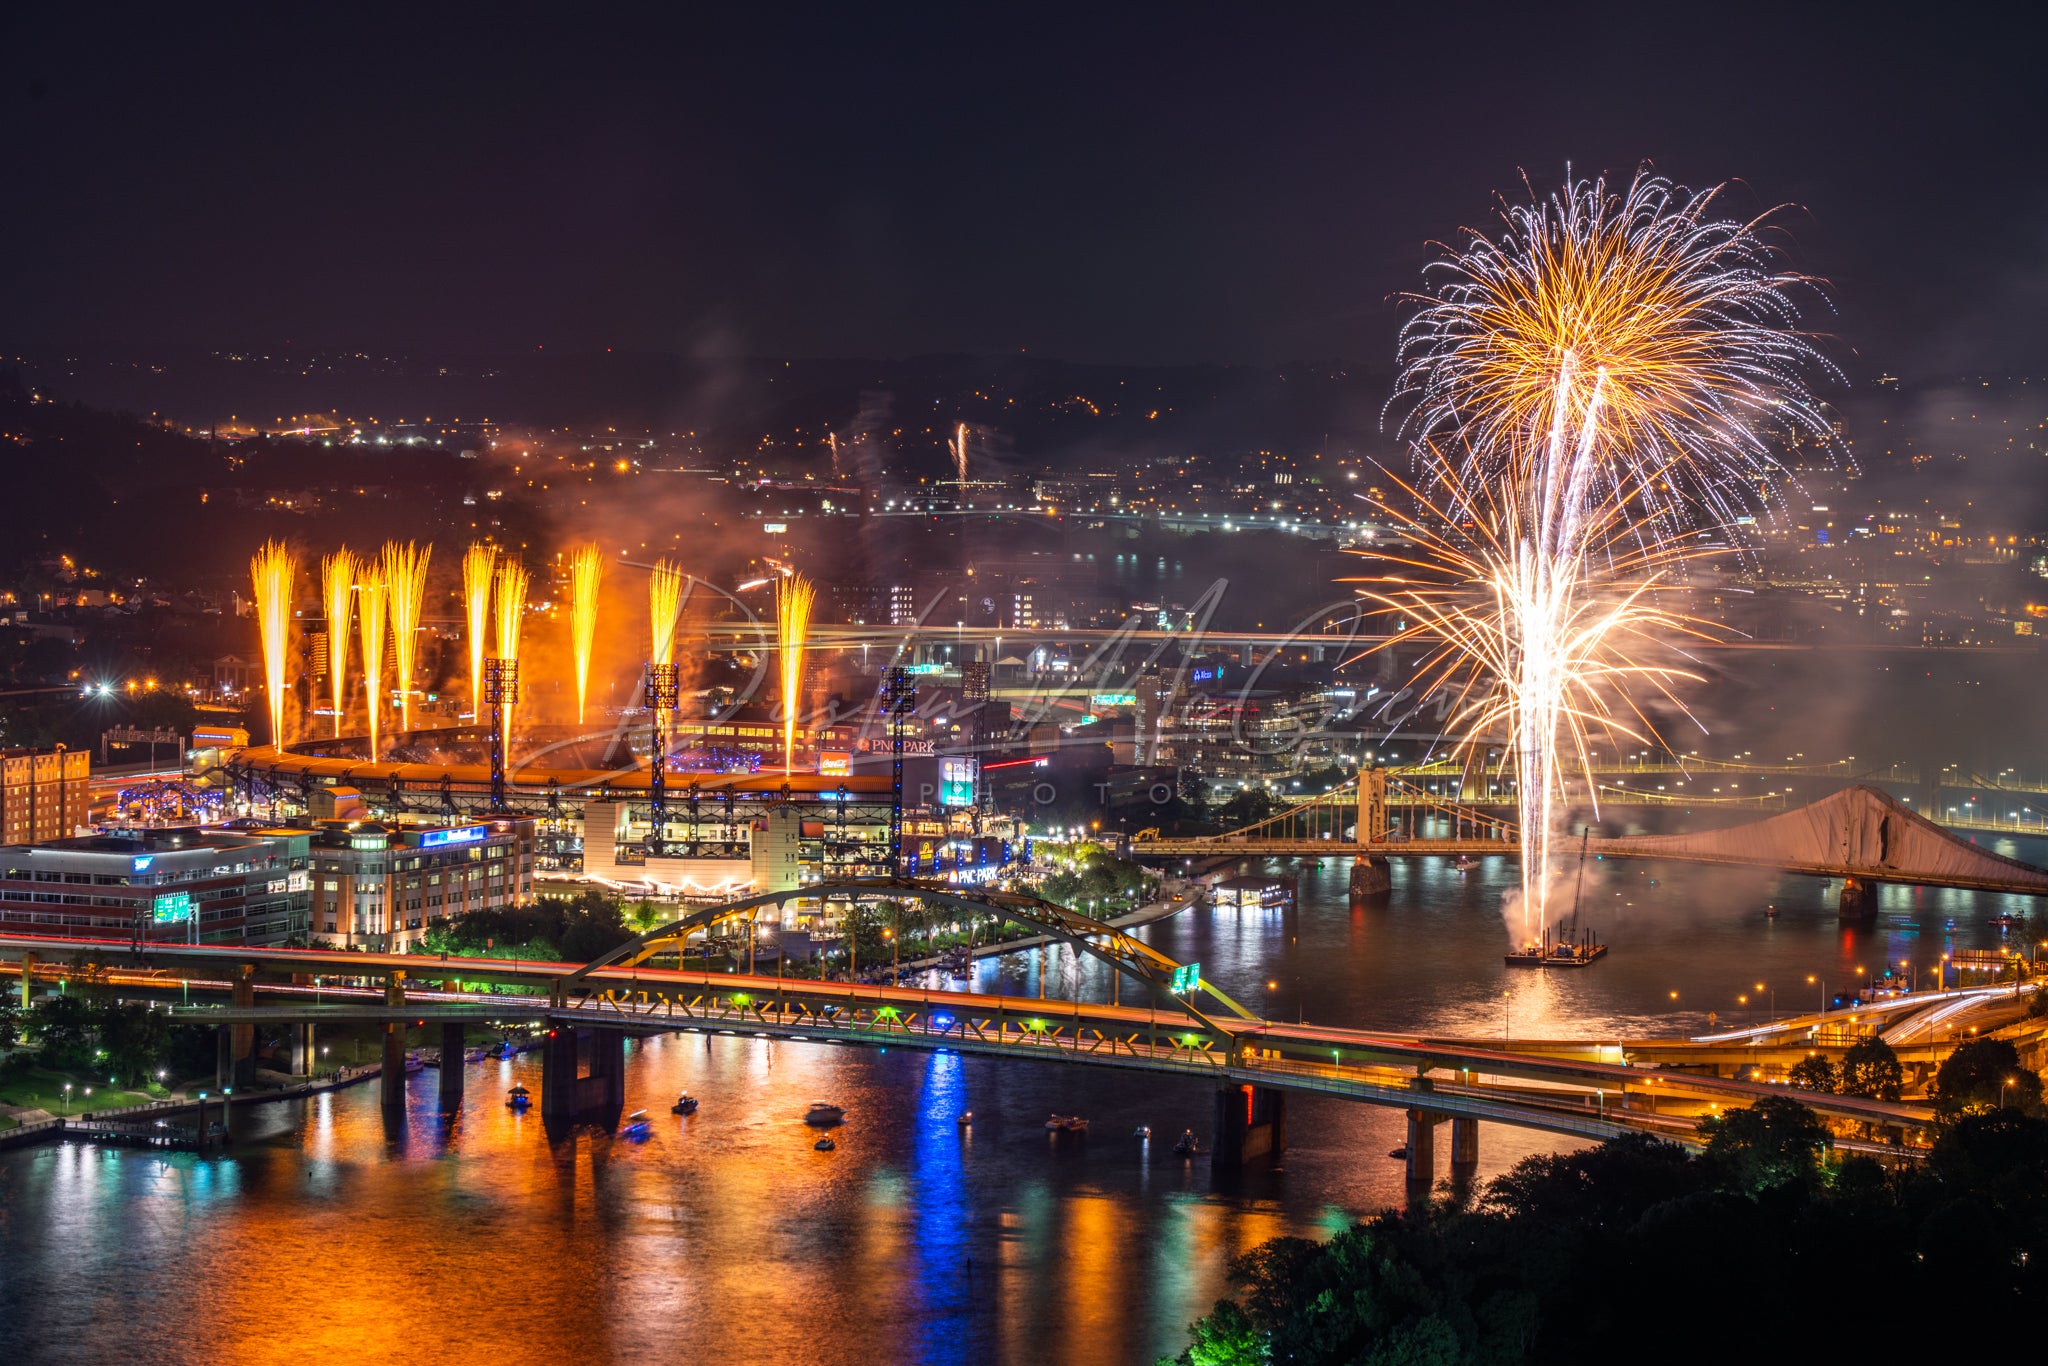 Pittsburgh Skyline Photo - PNC Park and Pittsburgh Fireworks Show – Dustin  McGrew Photography